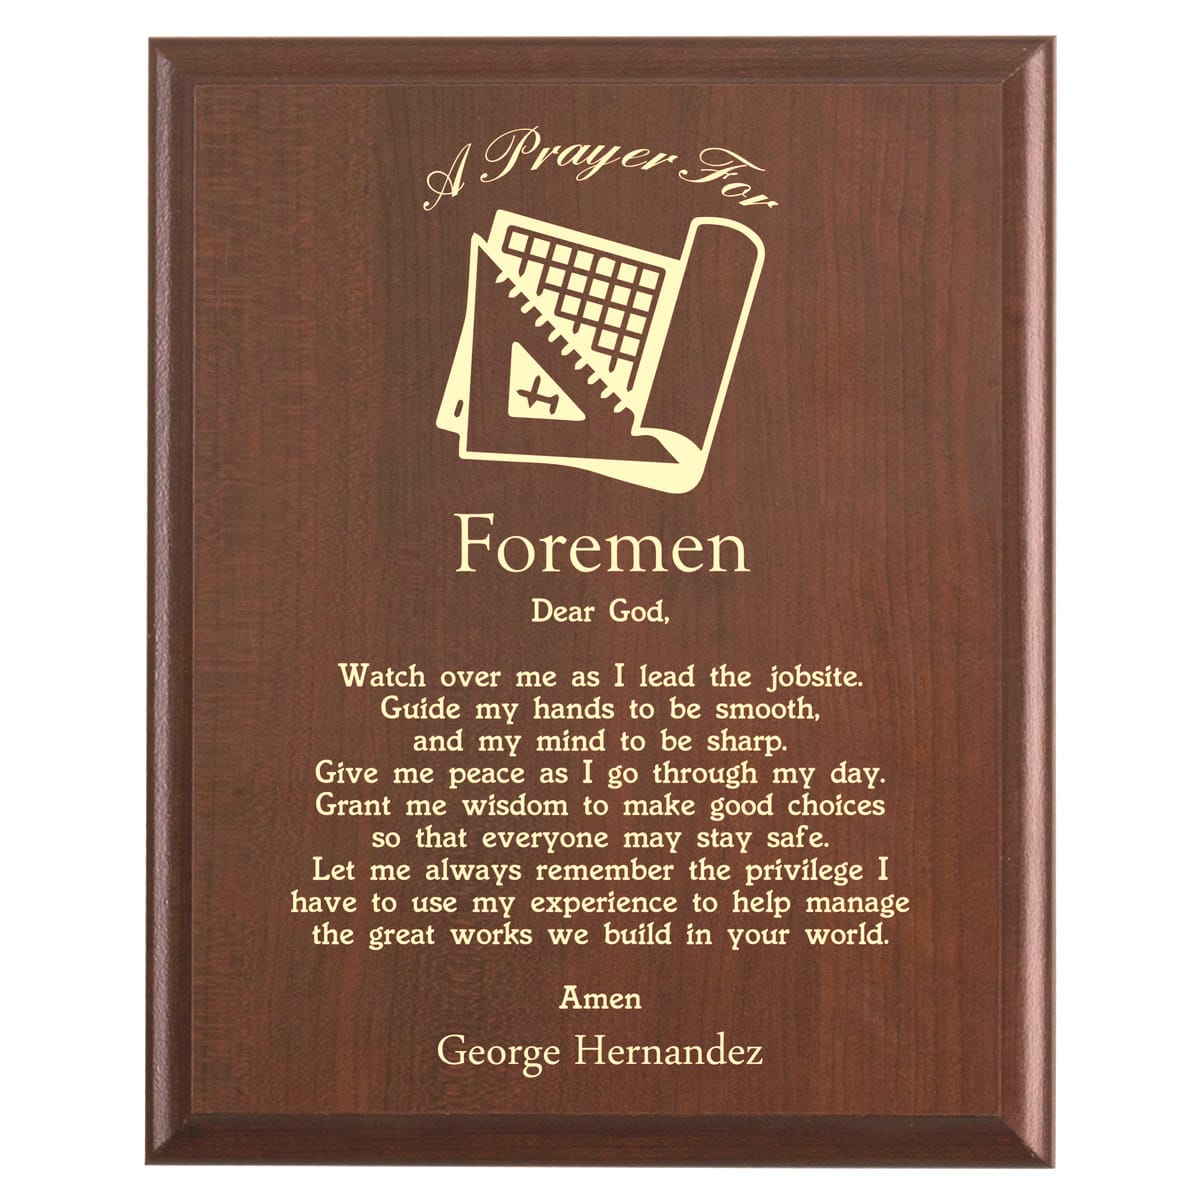 Plaque photo: Foreman Prayer Plaque design with free personalization. Wood style finish with customized text.